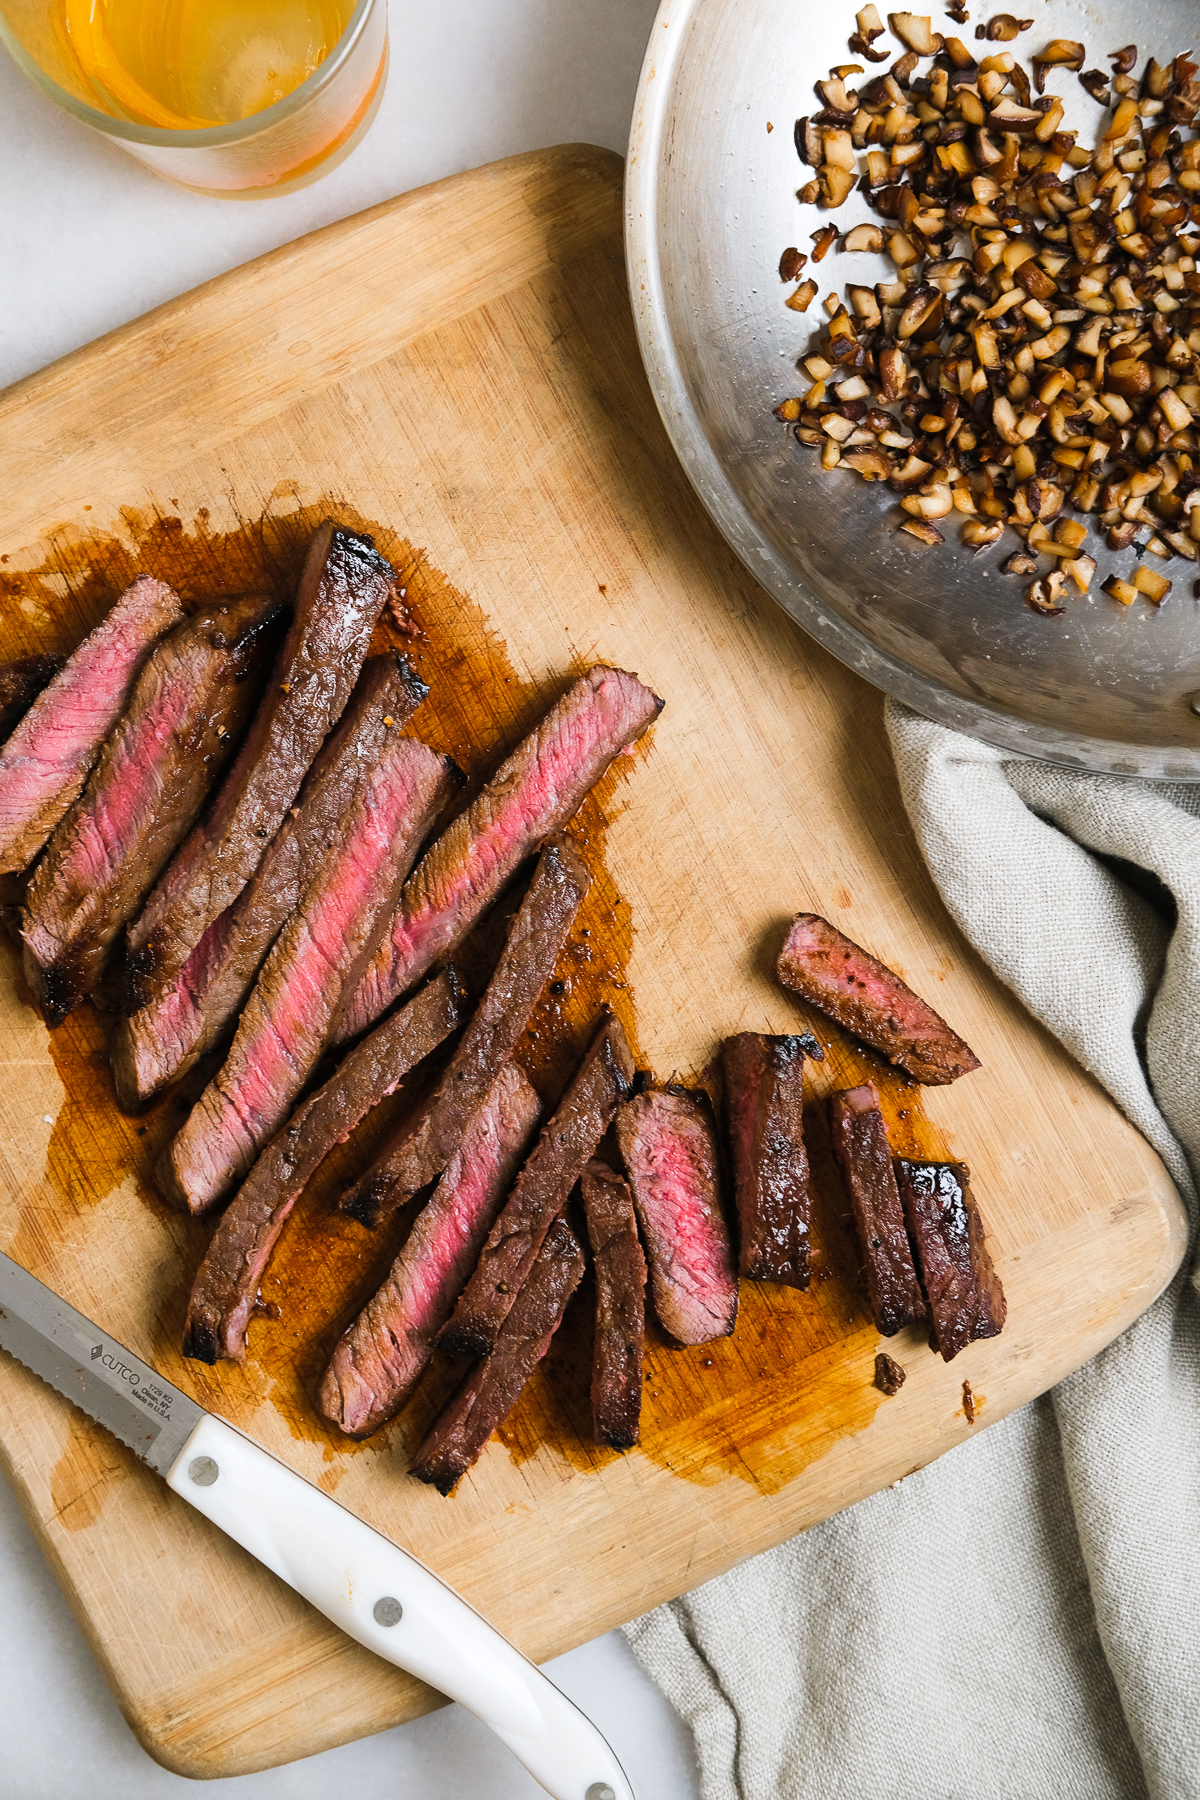 london broil cut up on a cutting board with small mushroom bites